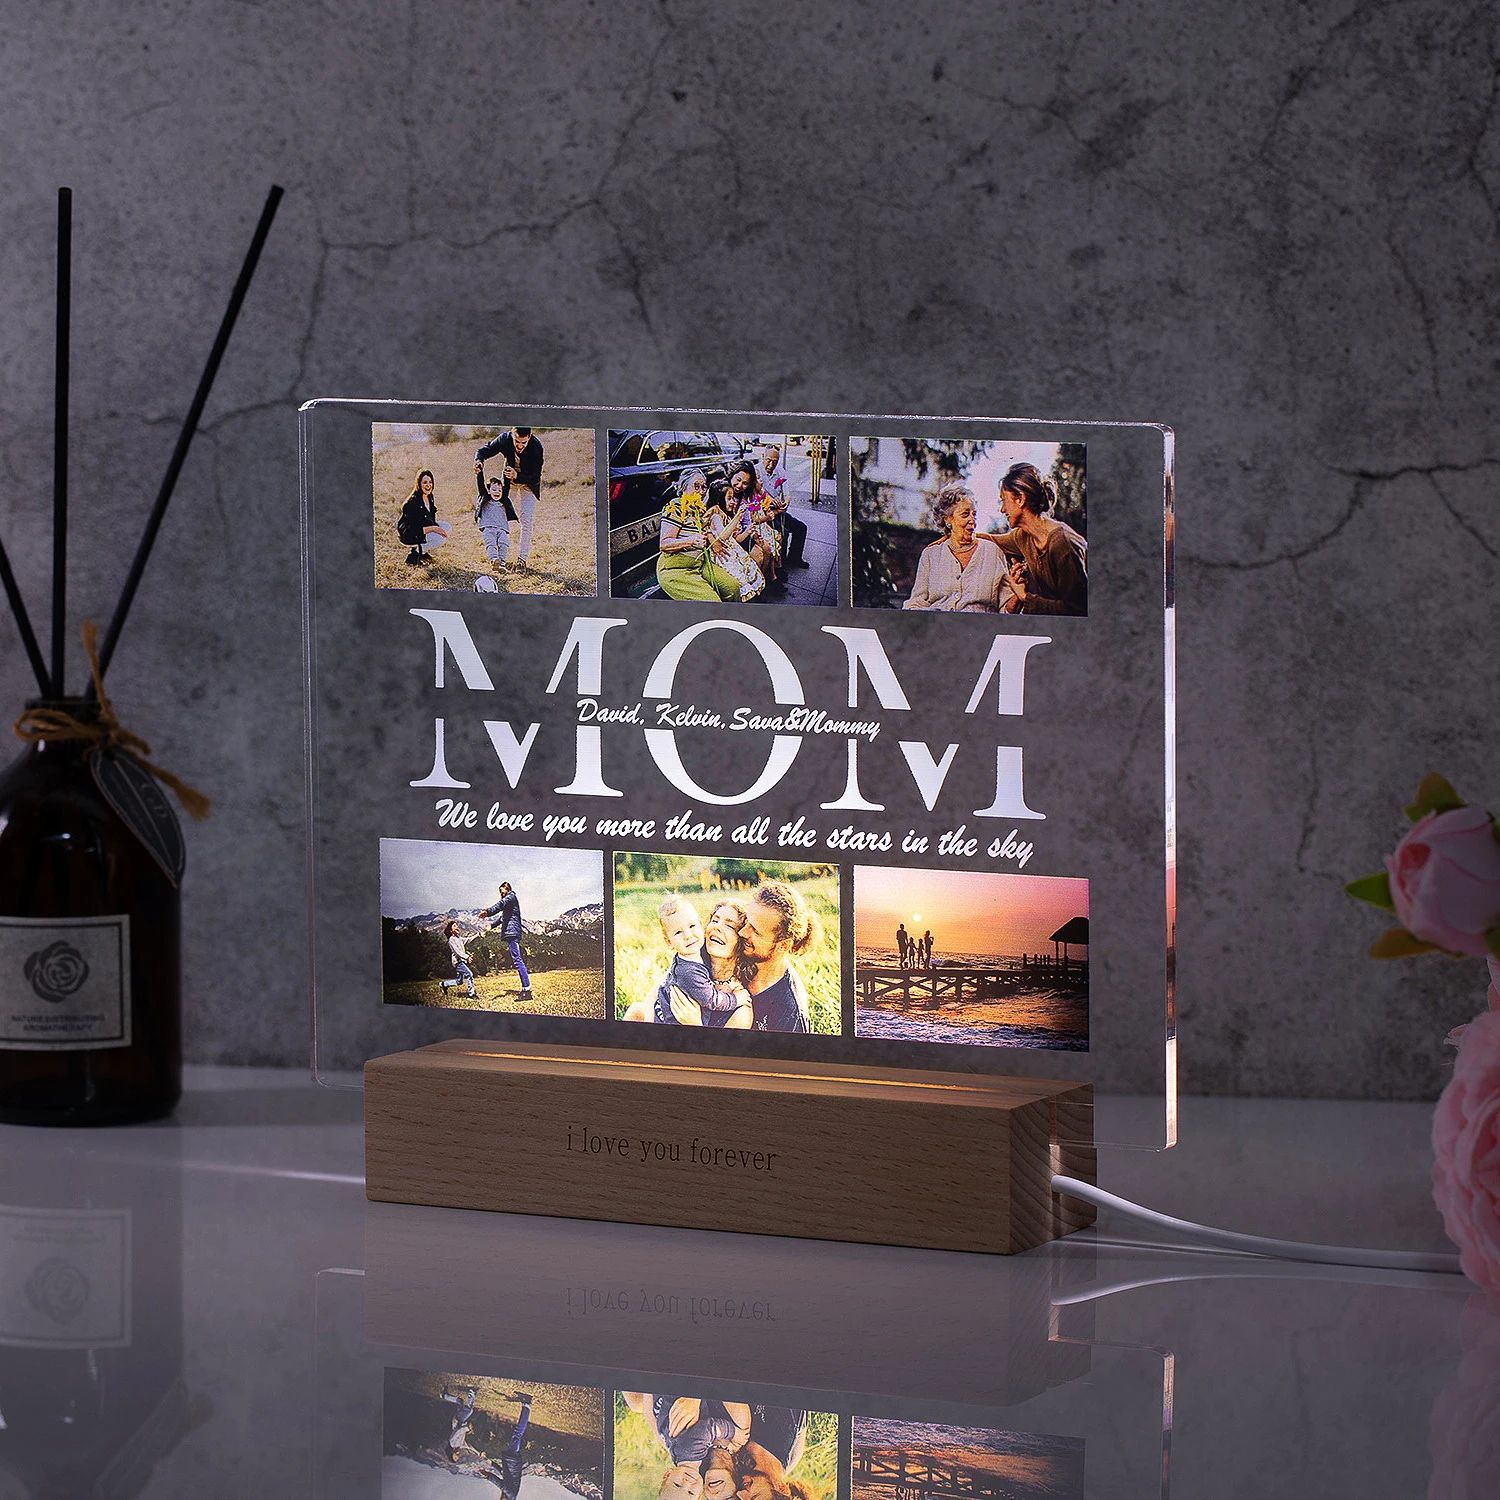 

Personalized Custom Photo Text 3D Acrylic Lamp Customized Bedroom Night Light for MOM DAD LOVE Family Day Wedding Birthday Gift